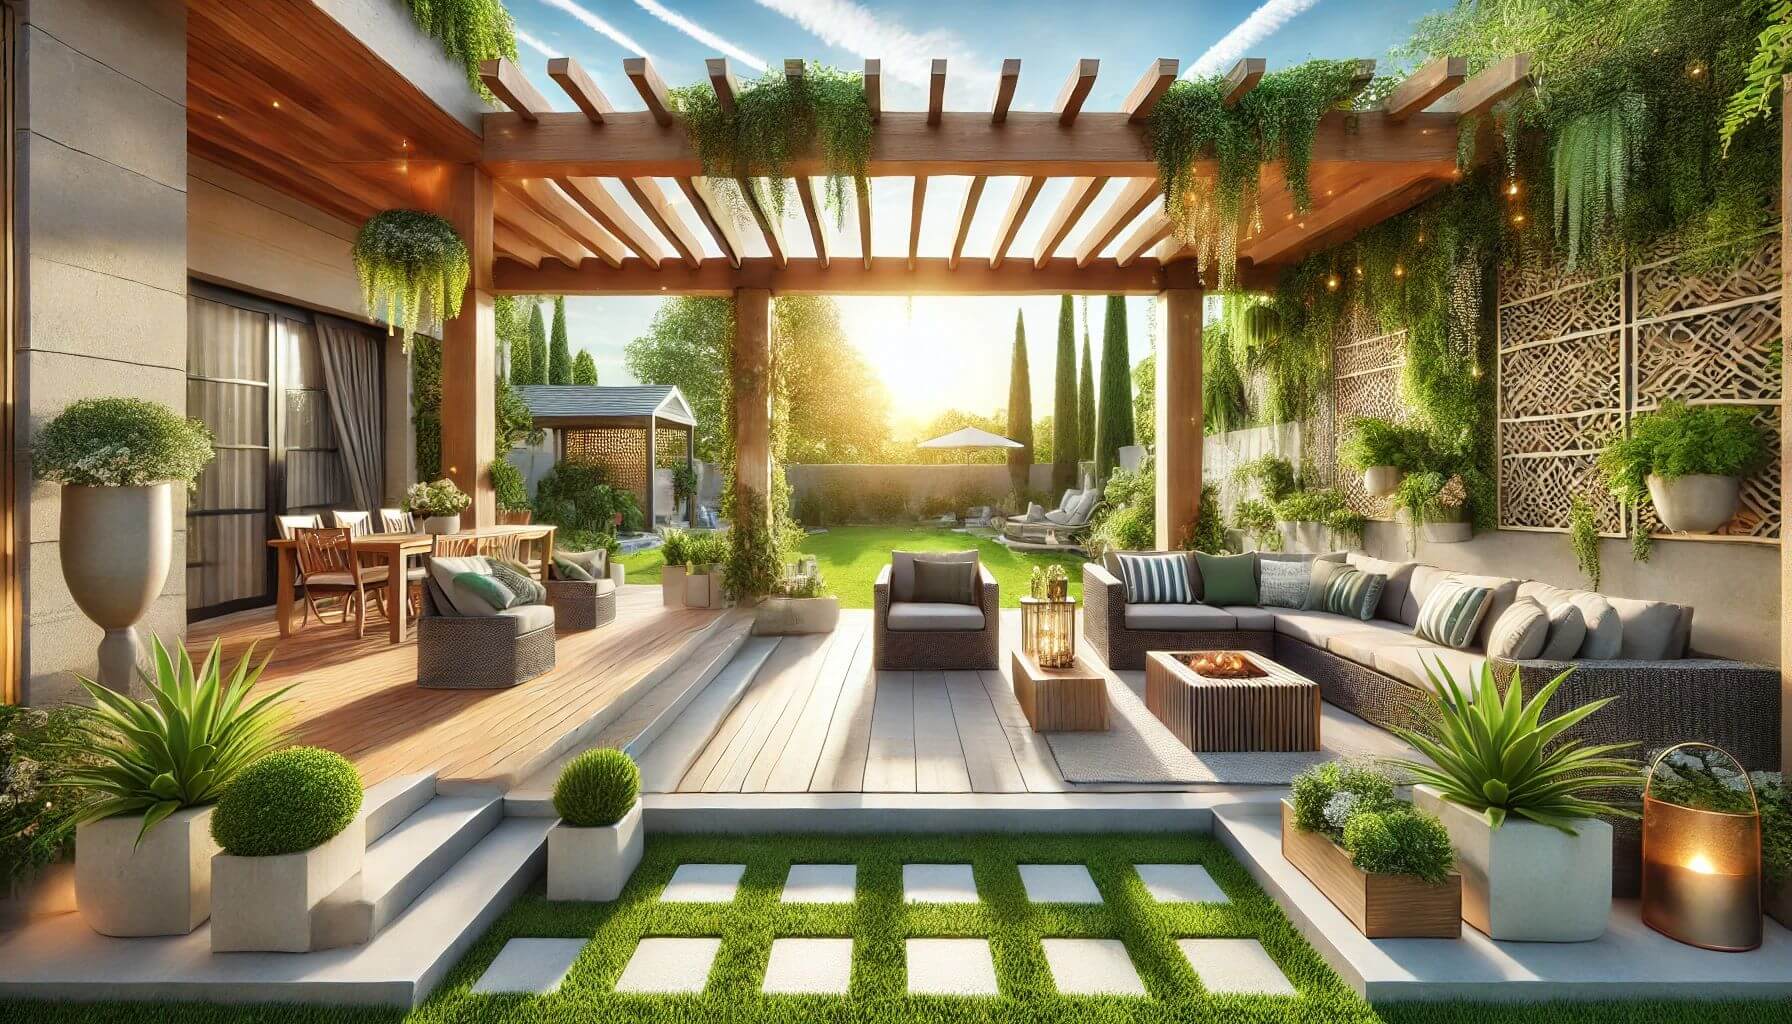 21 Creative Rectangle Patio Design Ideas Perfect for Any Home